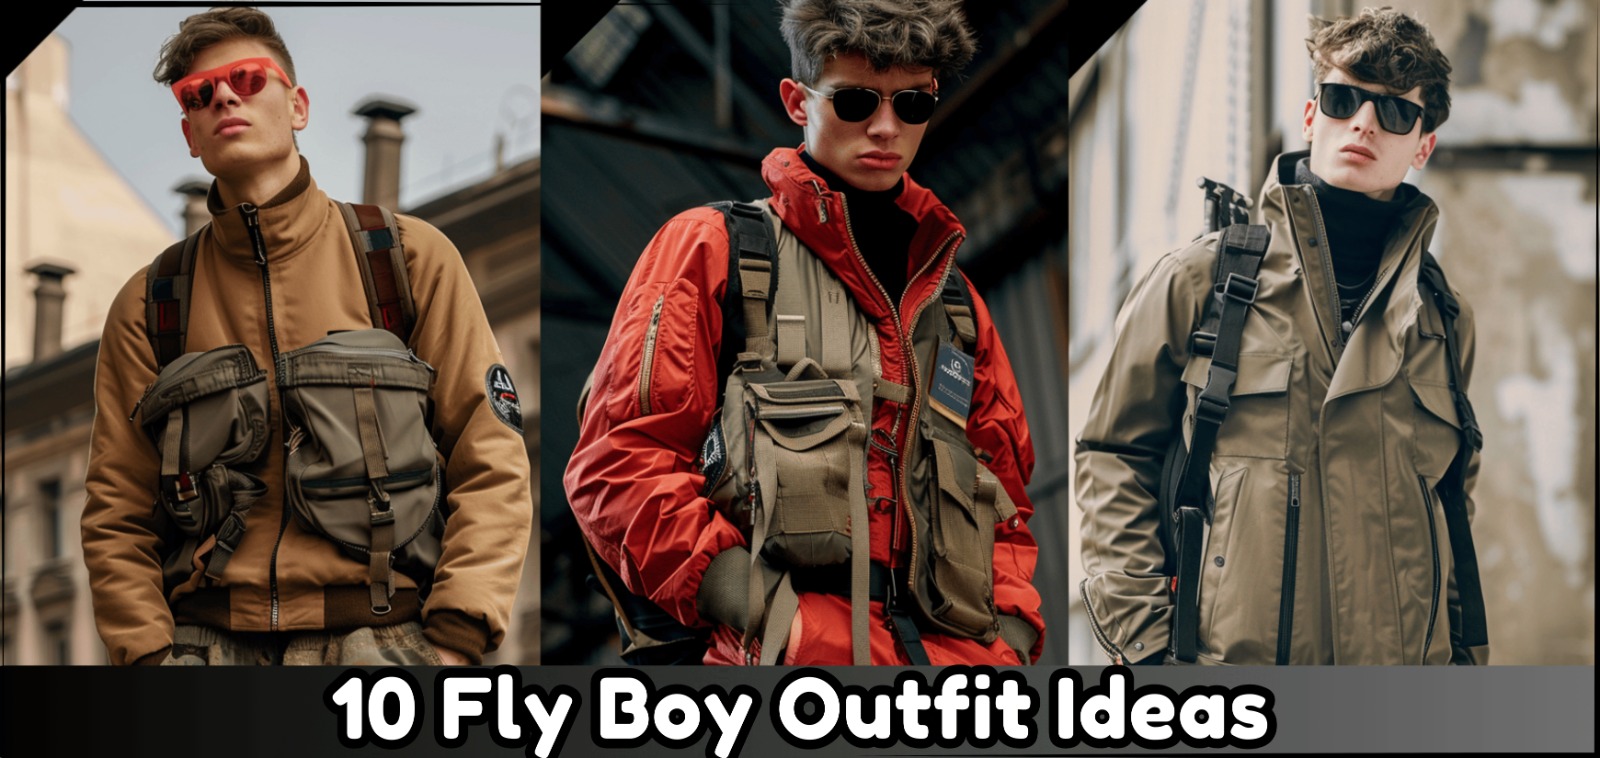 10 Fly Boy Outfit Ideas